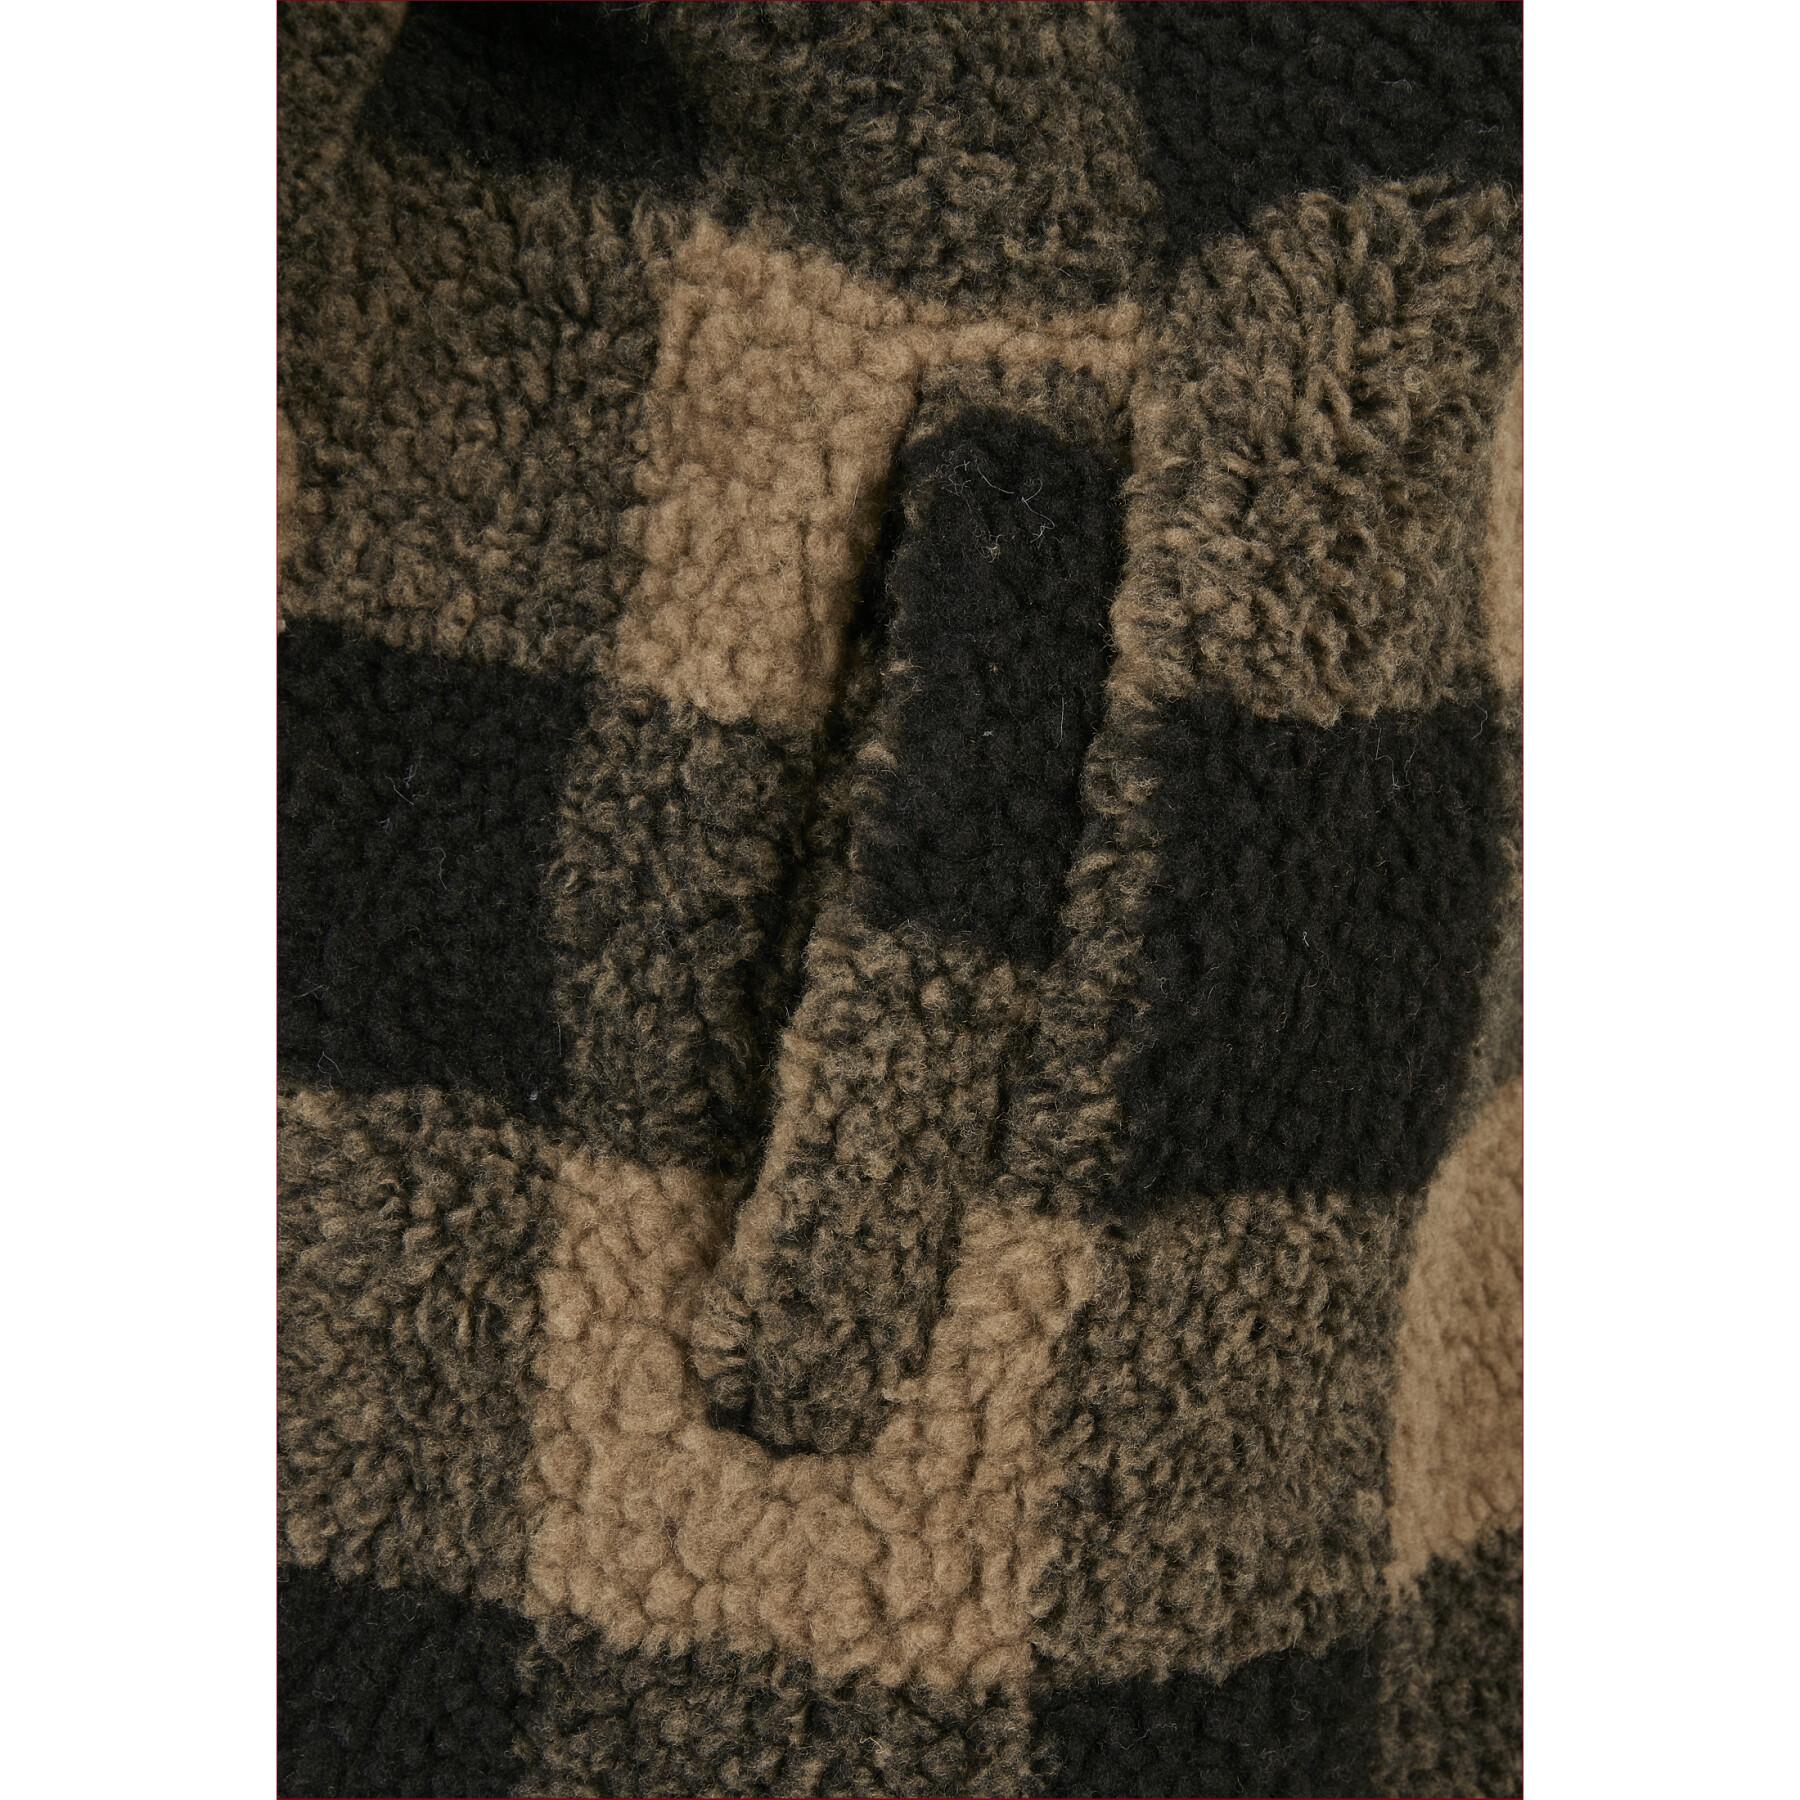 Polaire femme Urban Classics hooded oversized check sherpa